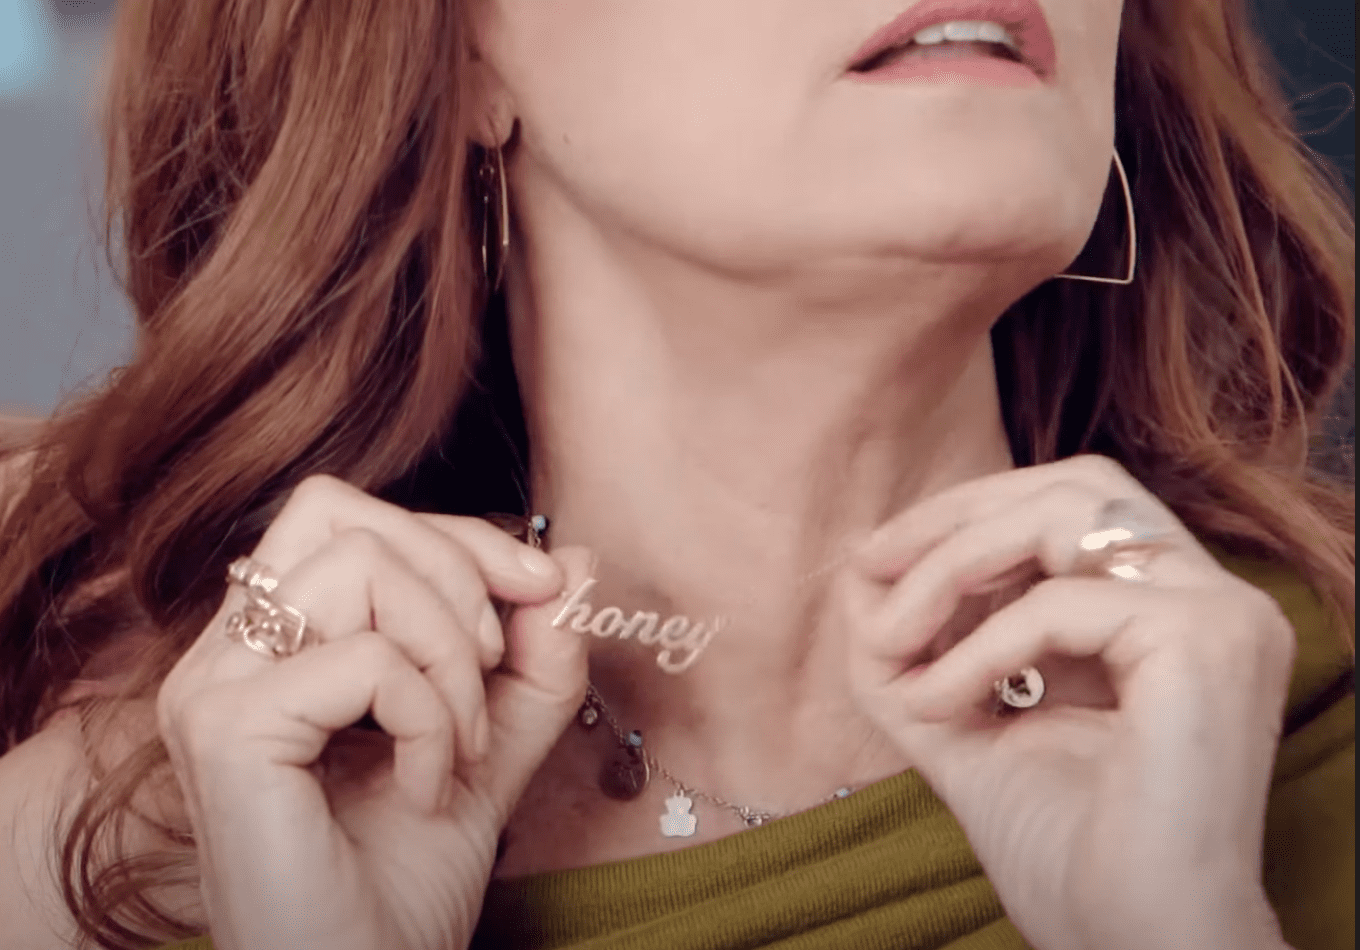 Susan Sarandon's necklace given to her by her daughter with the name her grandchildren call her | Source: youtube.com/@goodhousekeeping